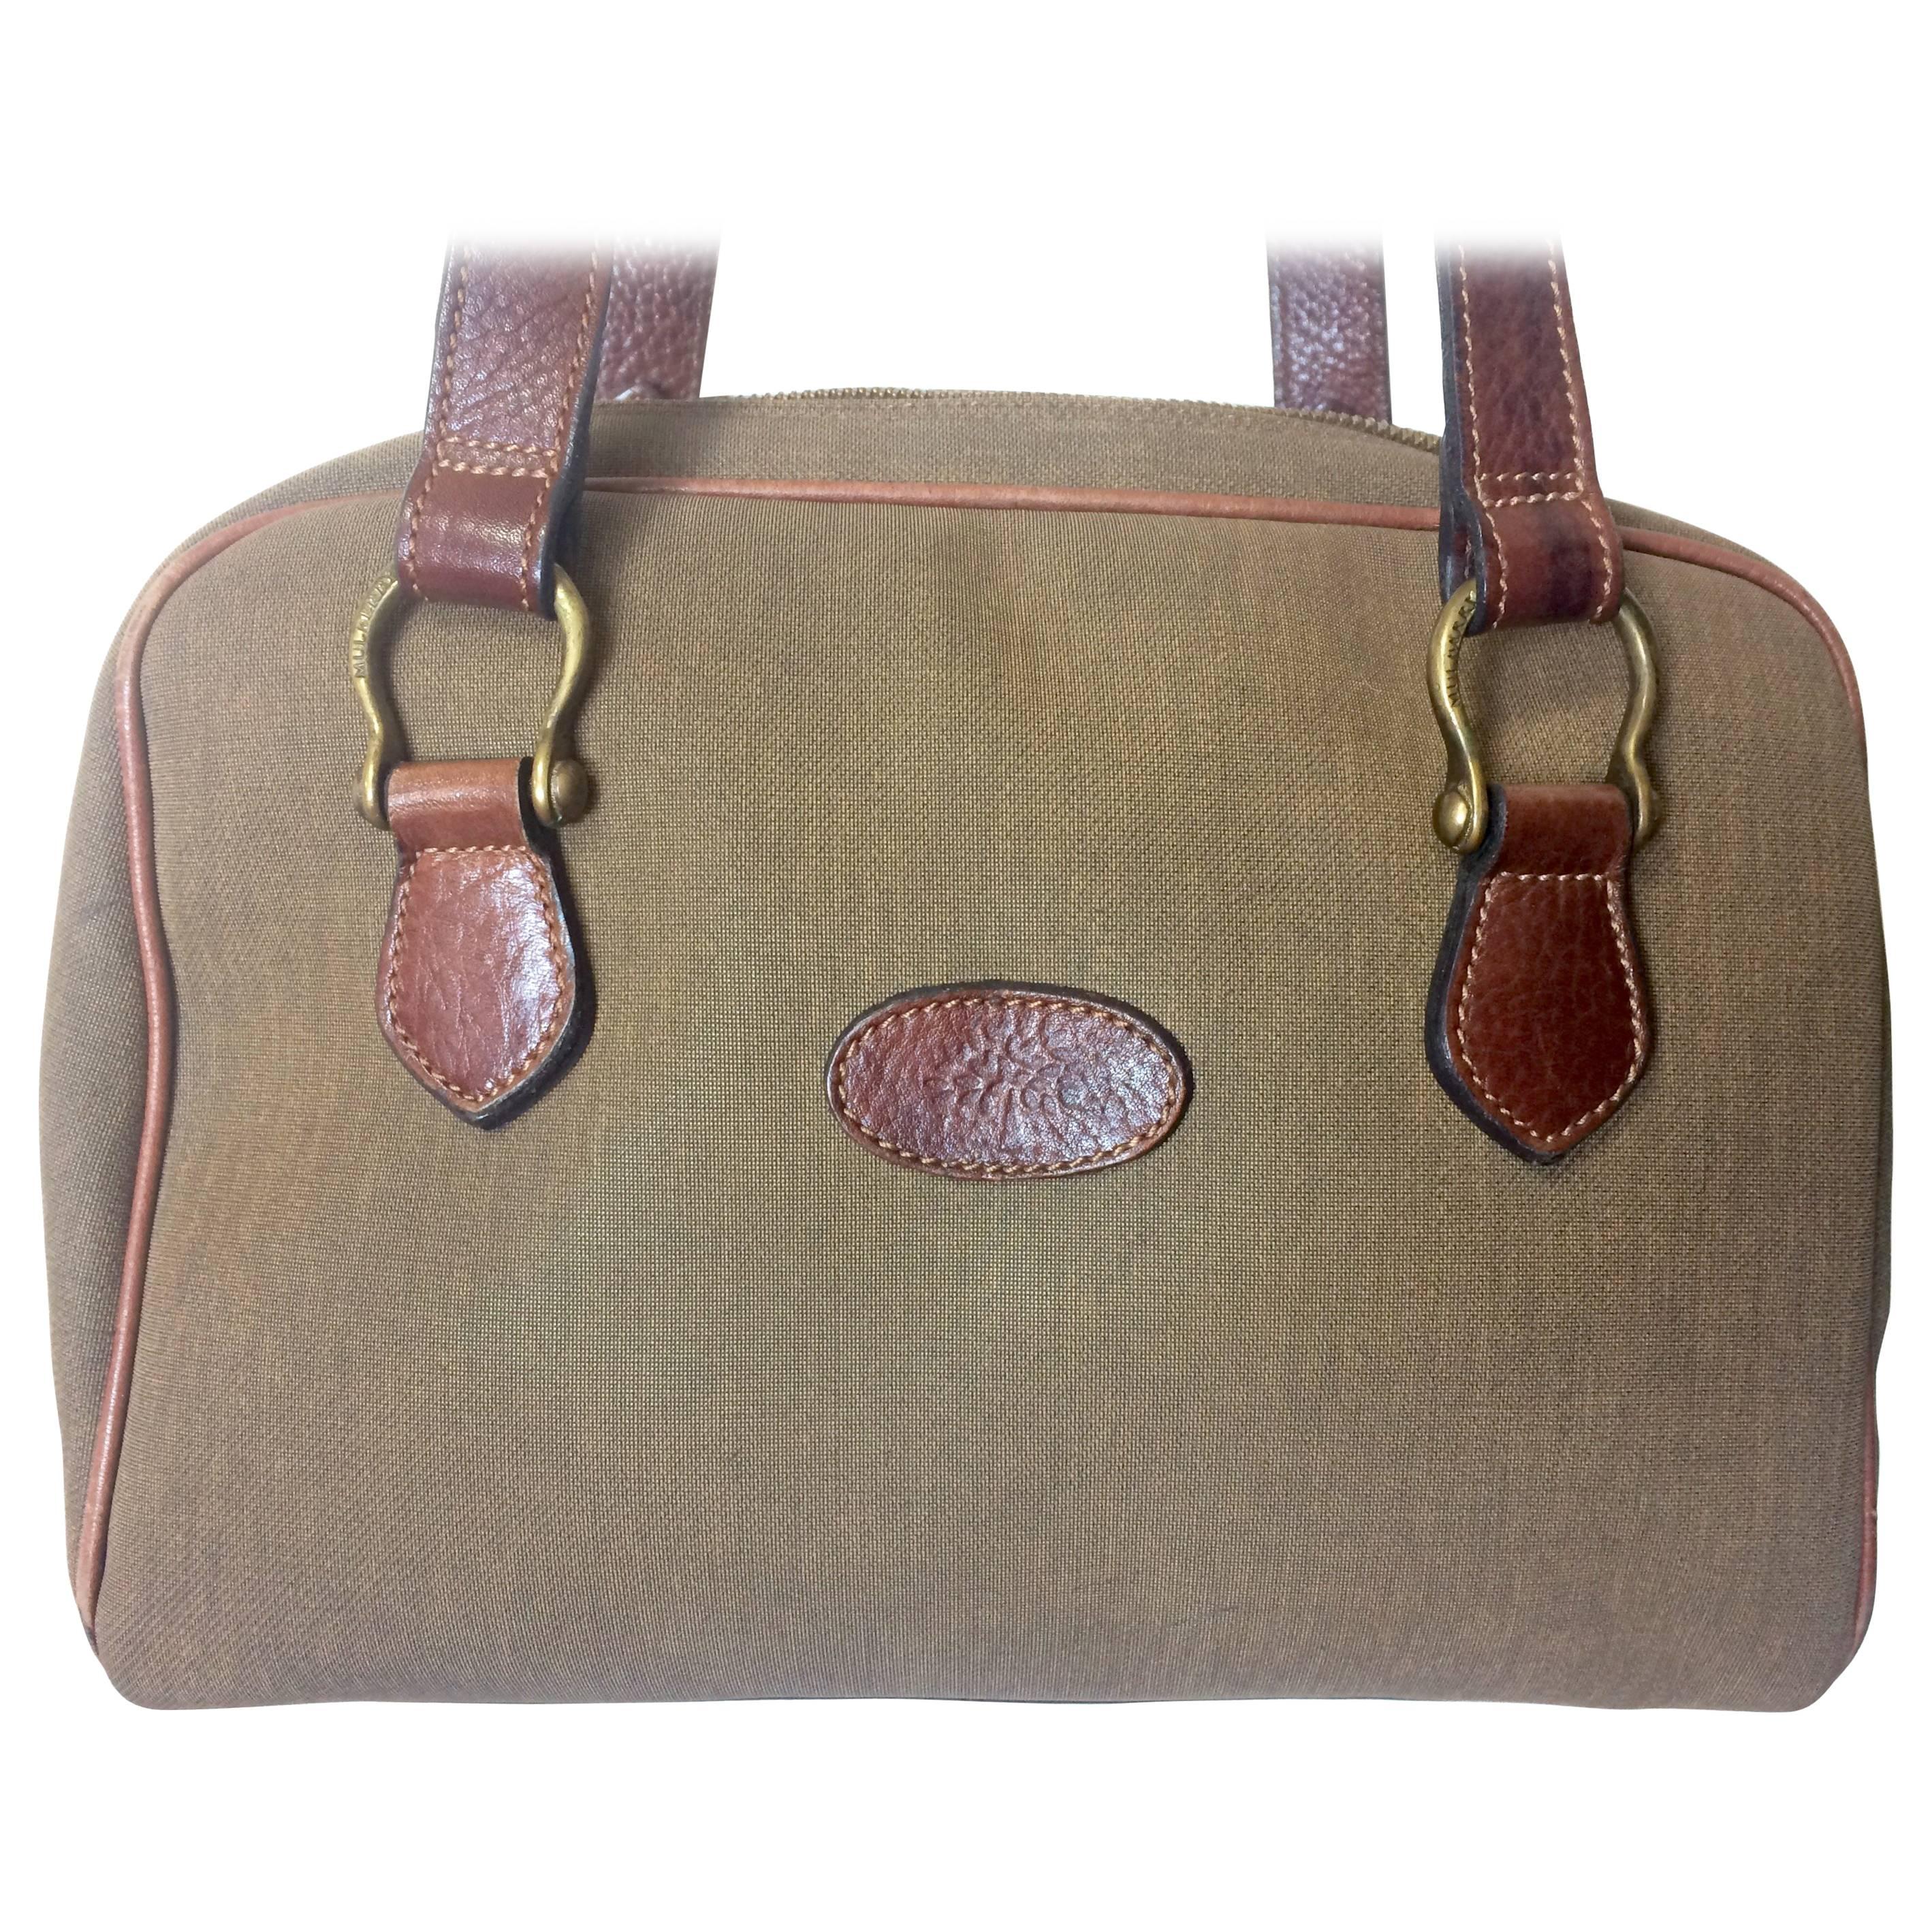 Vintage Mulberry khaki shoulder bag with fabric and brown leather mix trimmings. For Sale